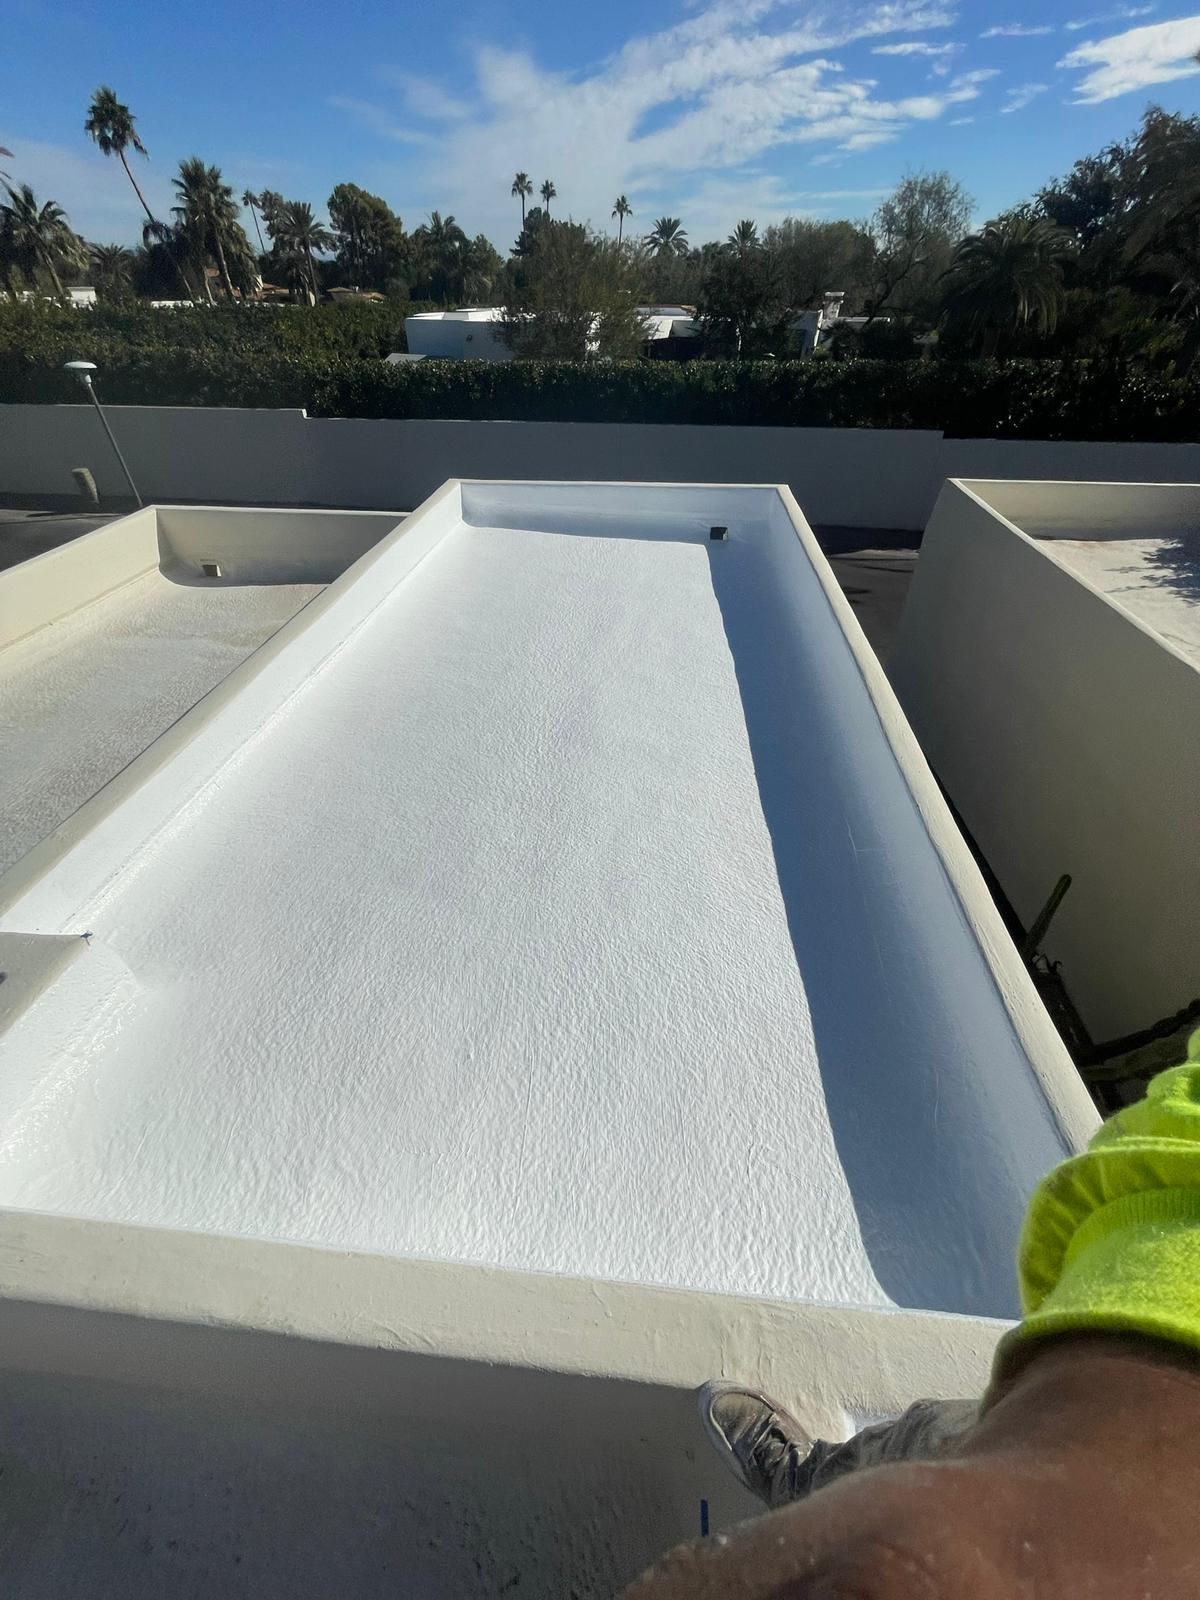 A wide-angle shot captures the expansive coverage of spray foam and coating installation on a Desert Mountain rooftop.